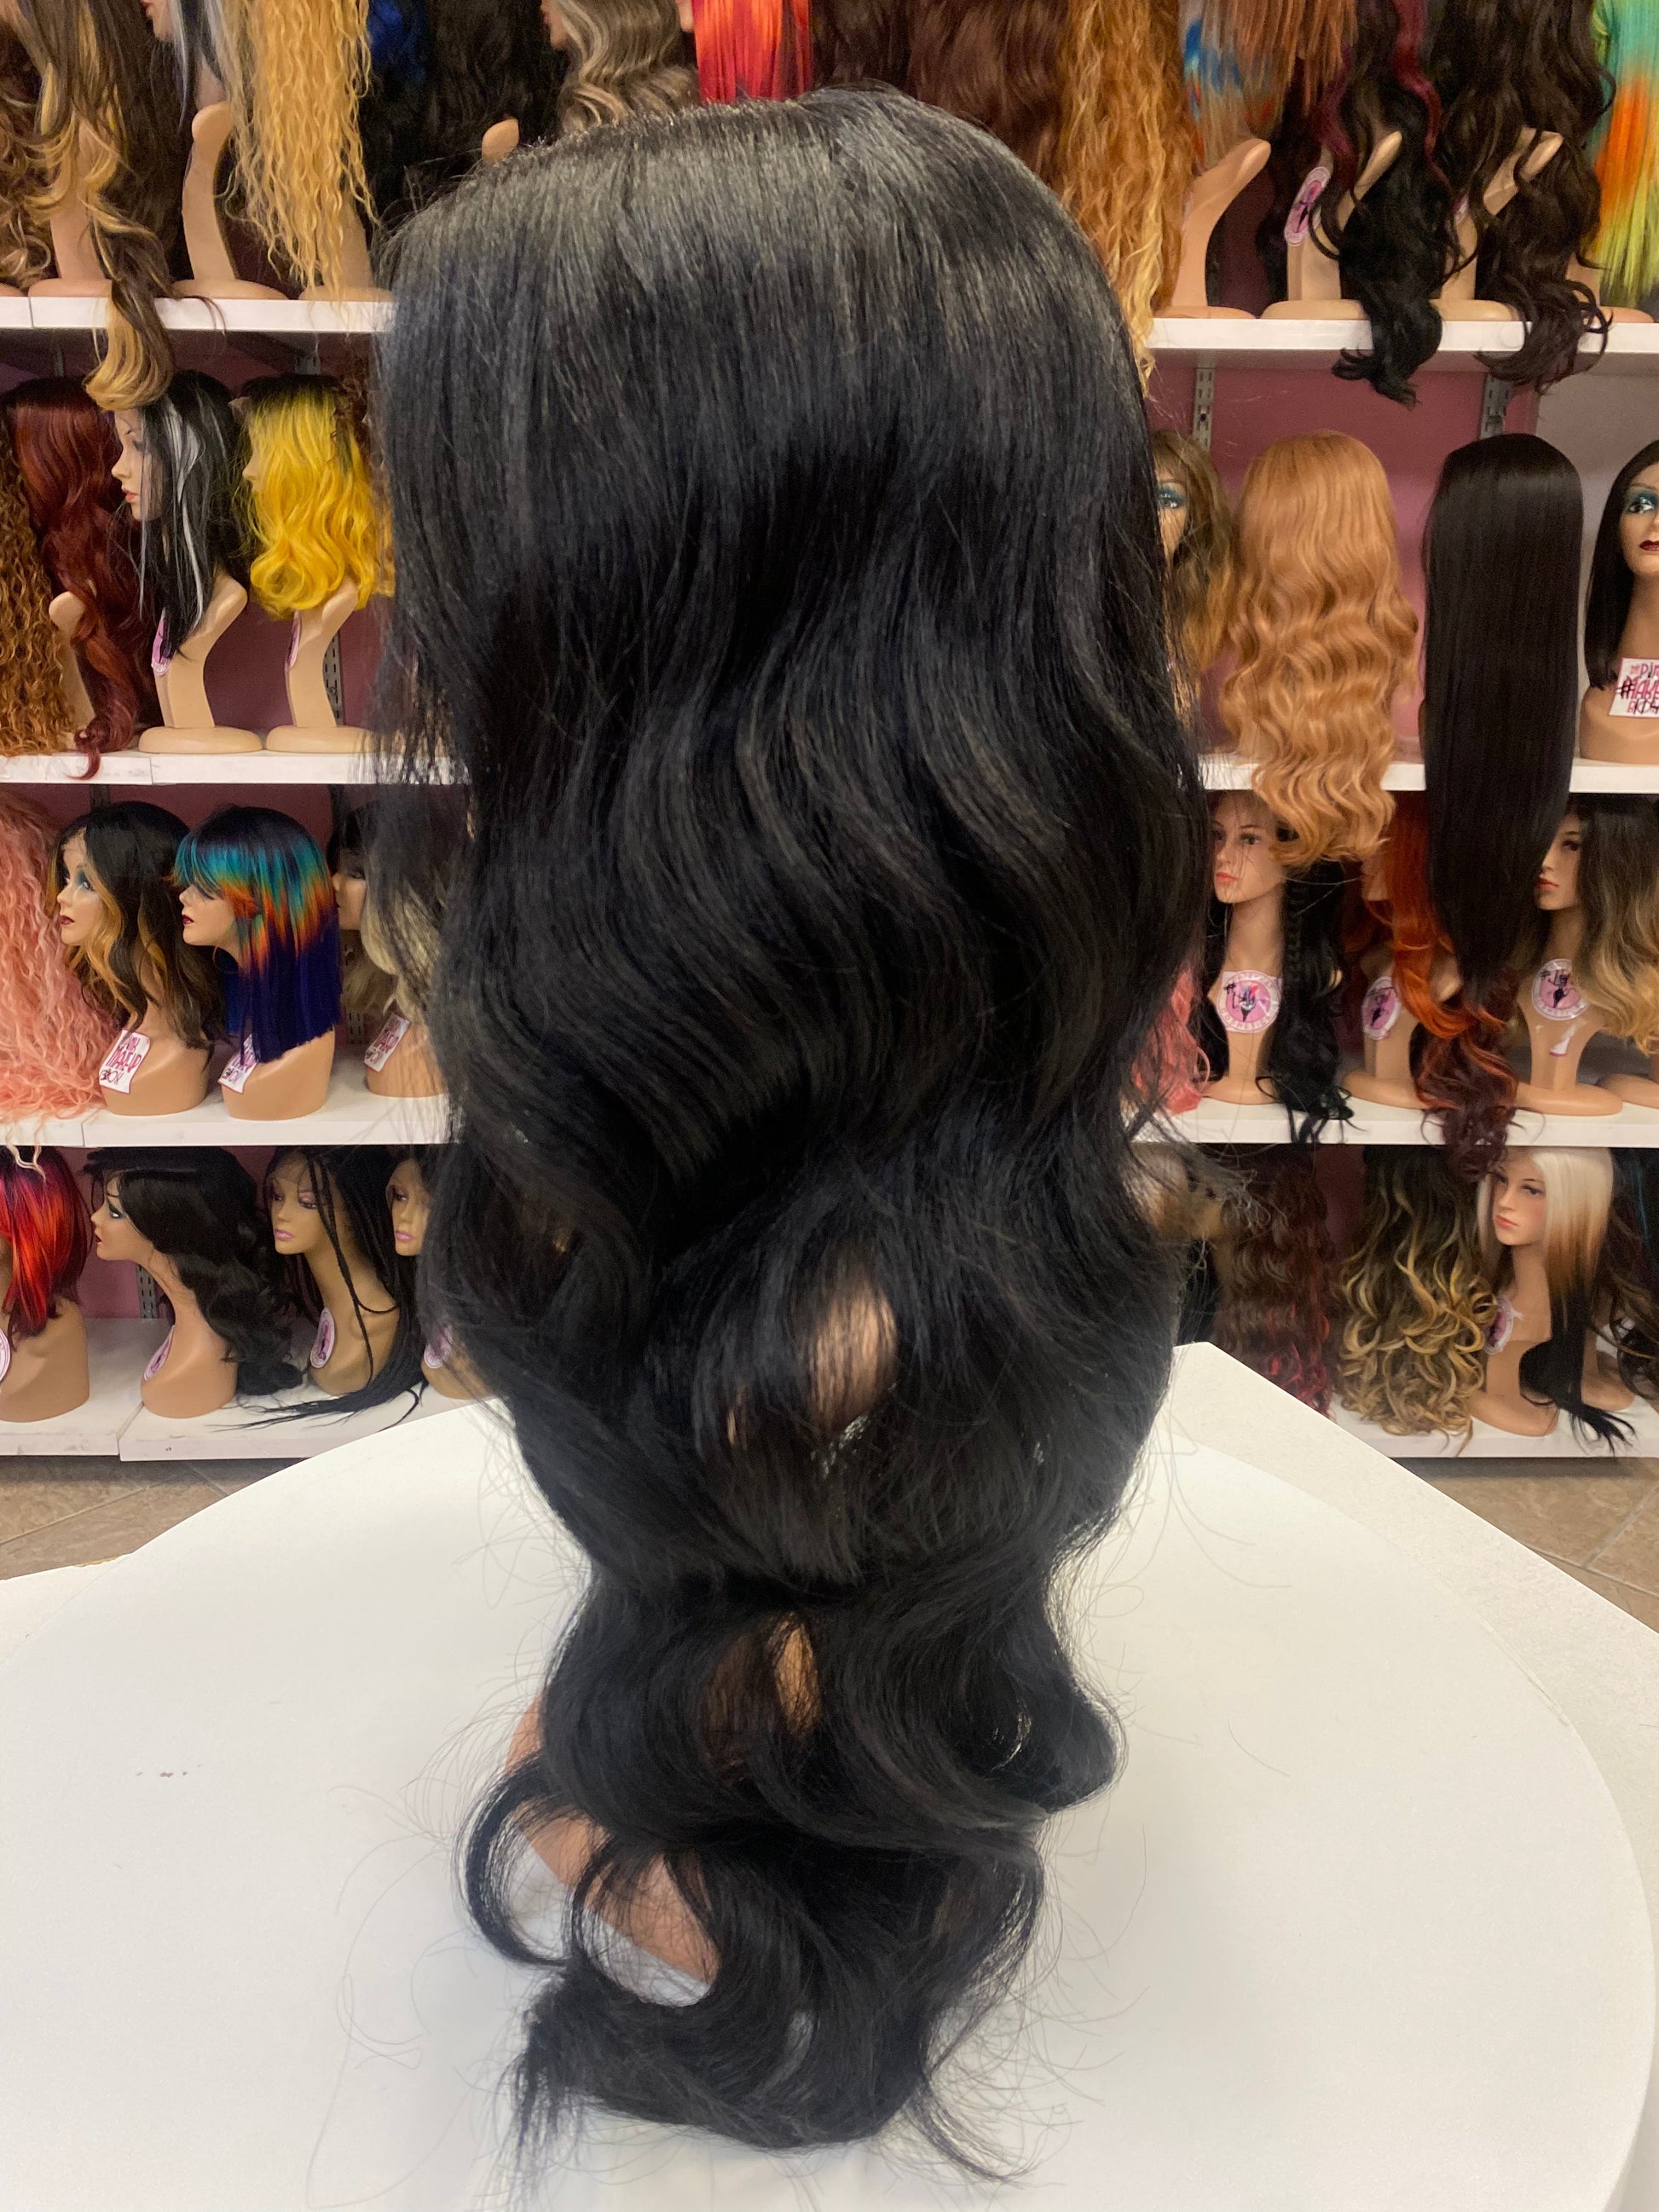 268 Amy - Left Part Lace Front Wig - 1B - DaizyKat Cosmetics 268 Amy - Left Part Lace Front Wig - 1B DaizyKat Cosmetics Wigs